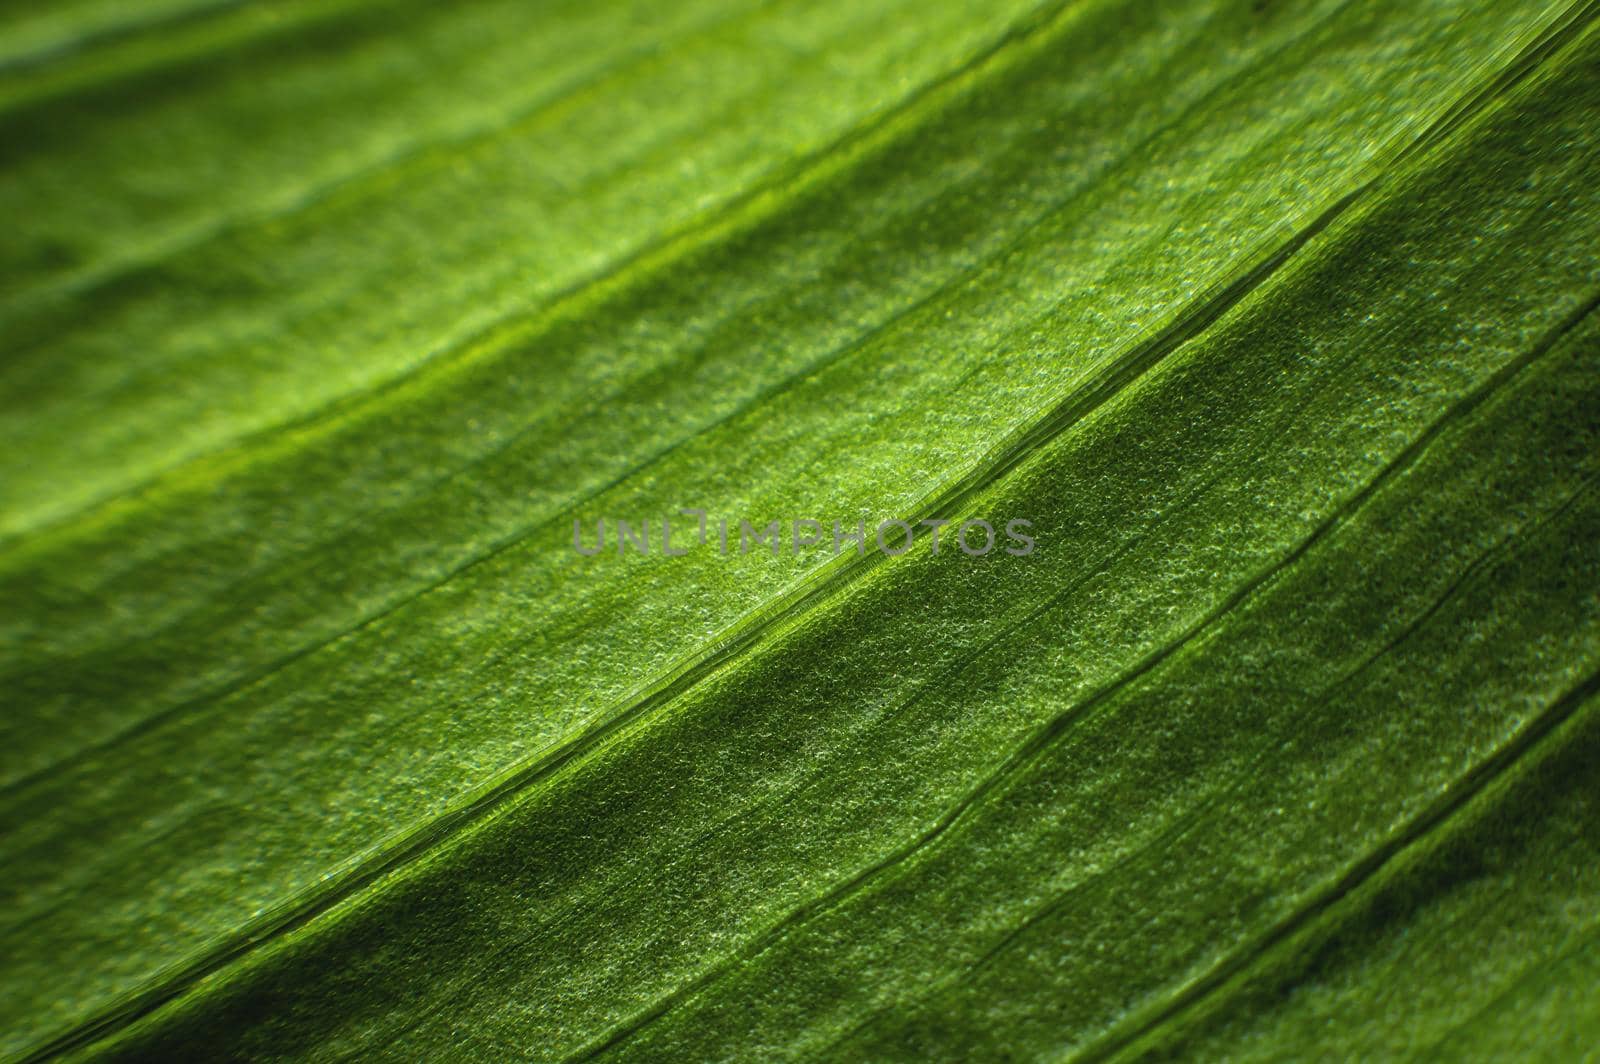 A close-up of a green leaf of a plant in macro photography showing the cells and structure of the green plant. Selective focus batanic background by yanik88